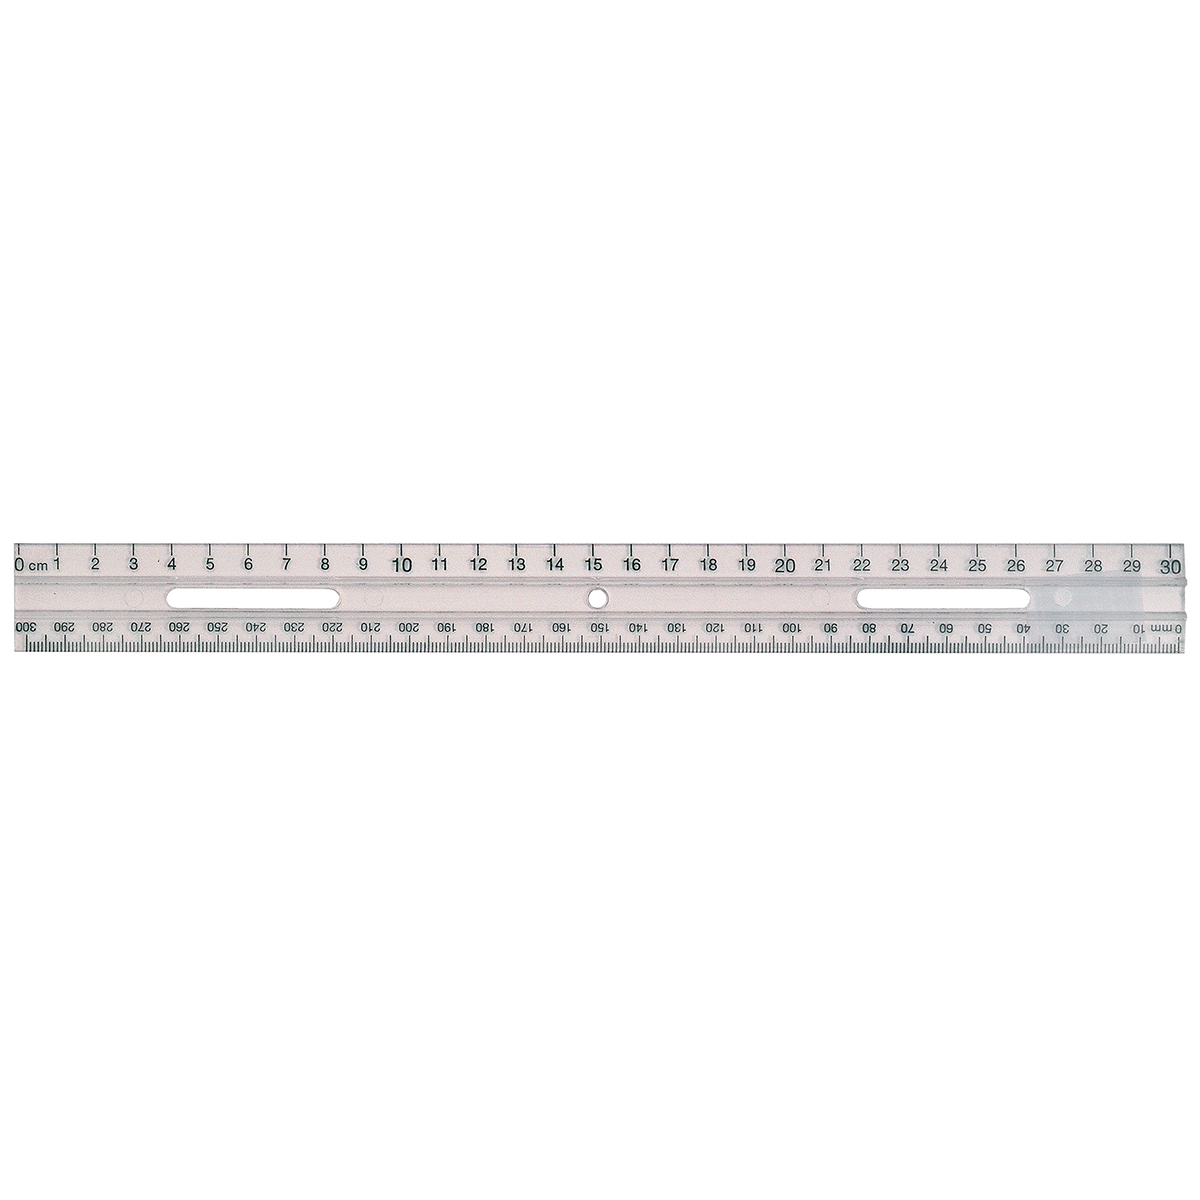 30cm Clear Ruler by First Stat - School Office Rule Inches Cm for